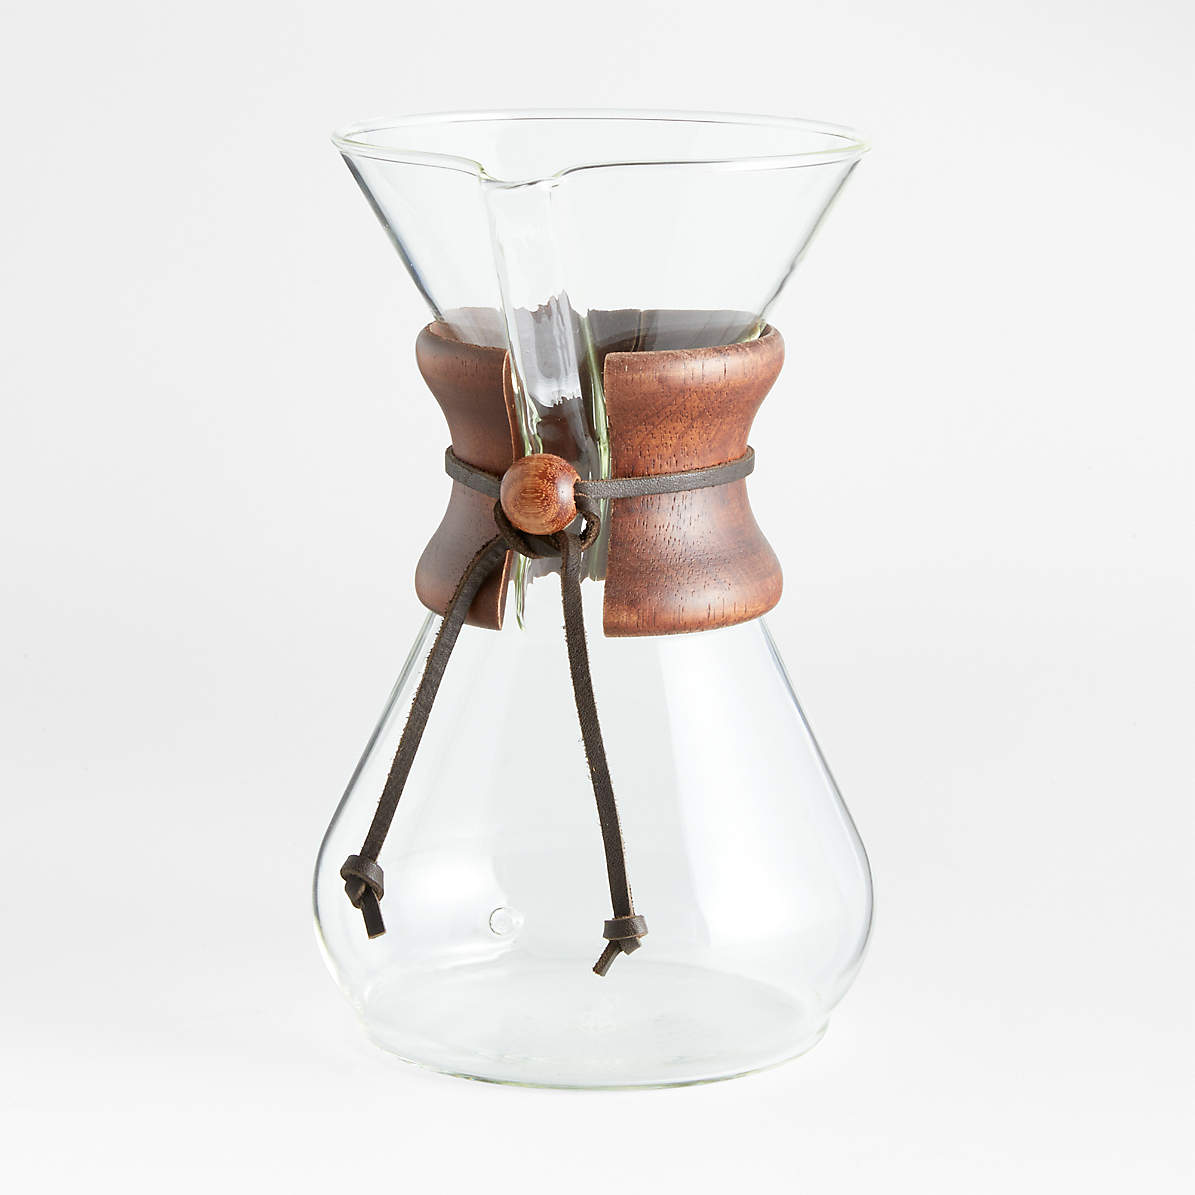 Chemex Pour Over Coffee Maker Glass Embossed Coffee Die Black